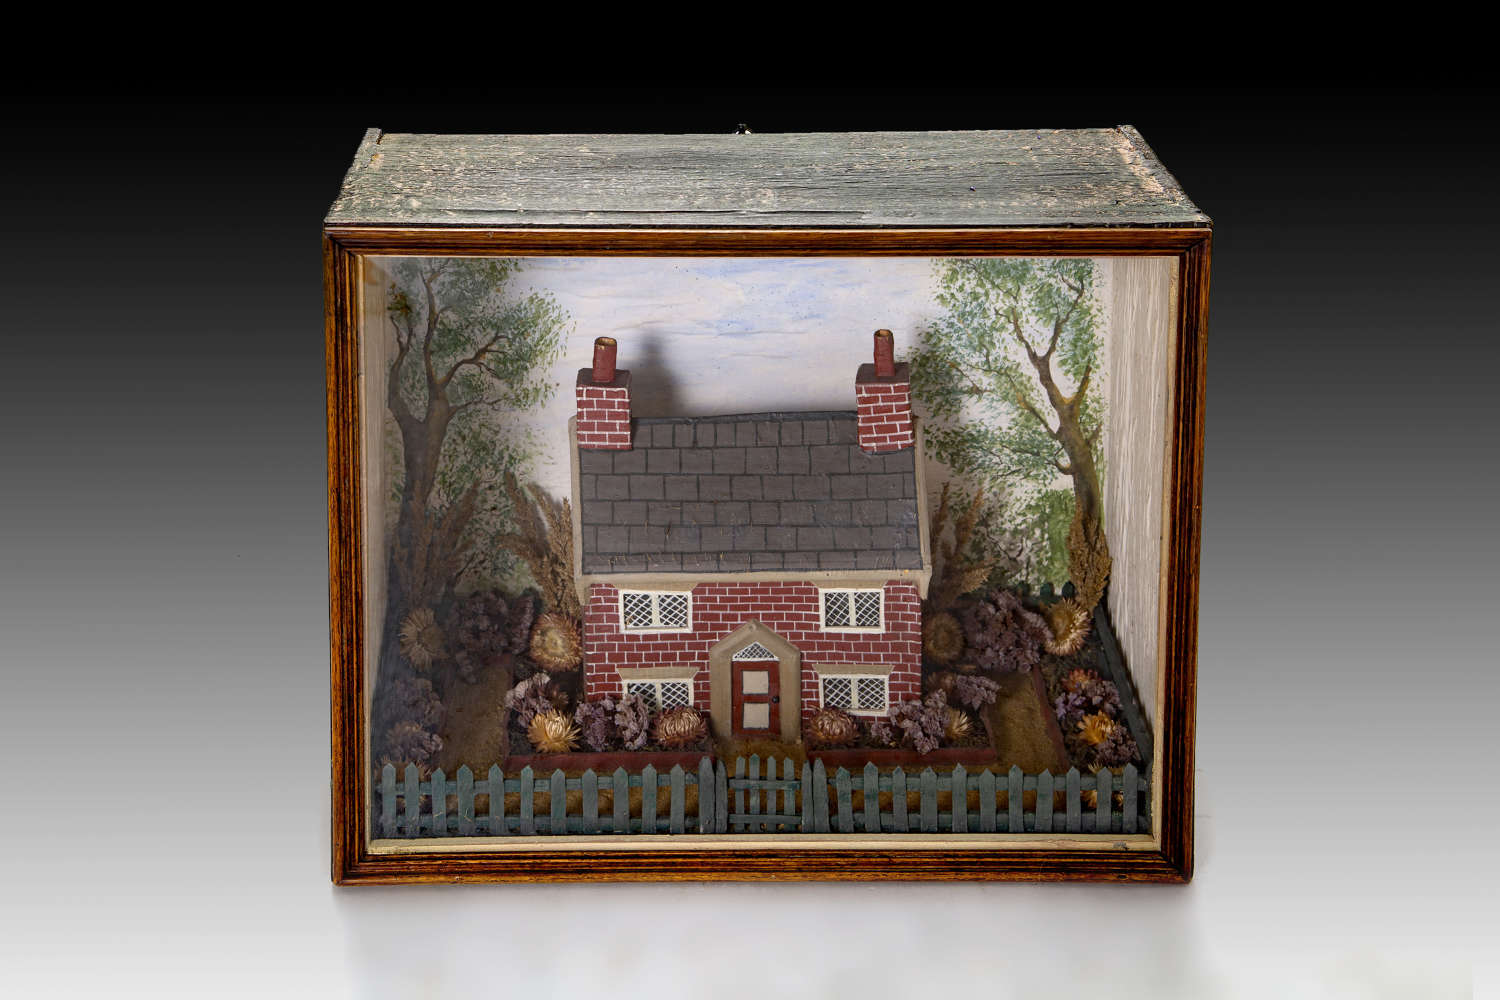 A delightful 19th century diorama of a country cottage